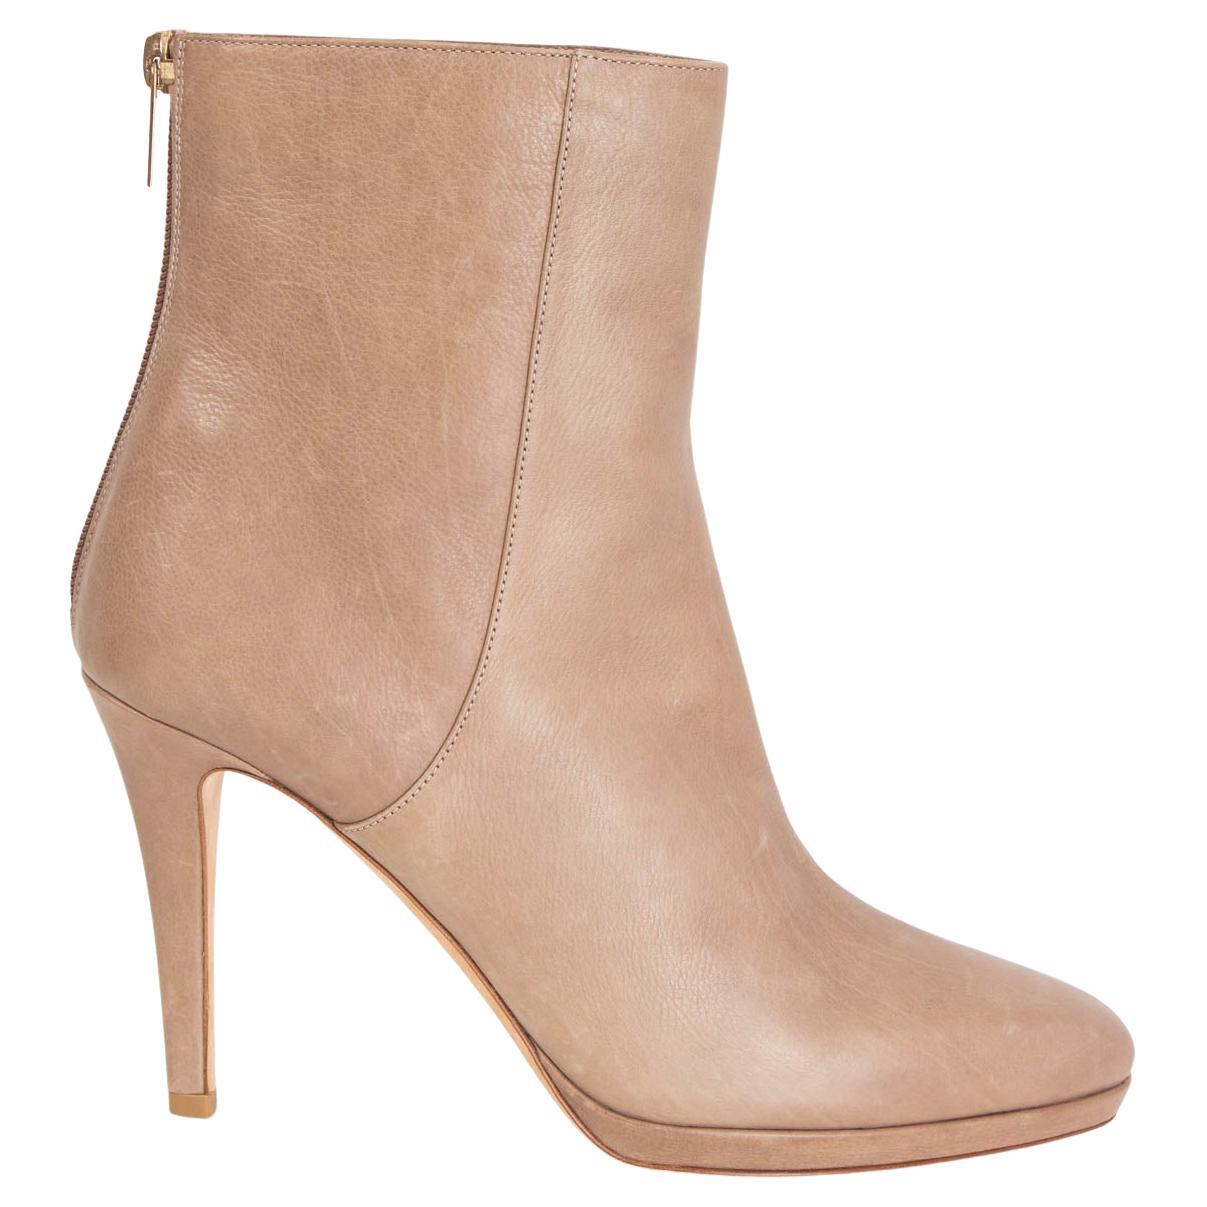 JIMMY CHOO taupe leather BRODY Ankle Boots Shoes 38.5 For Sale